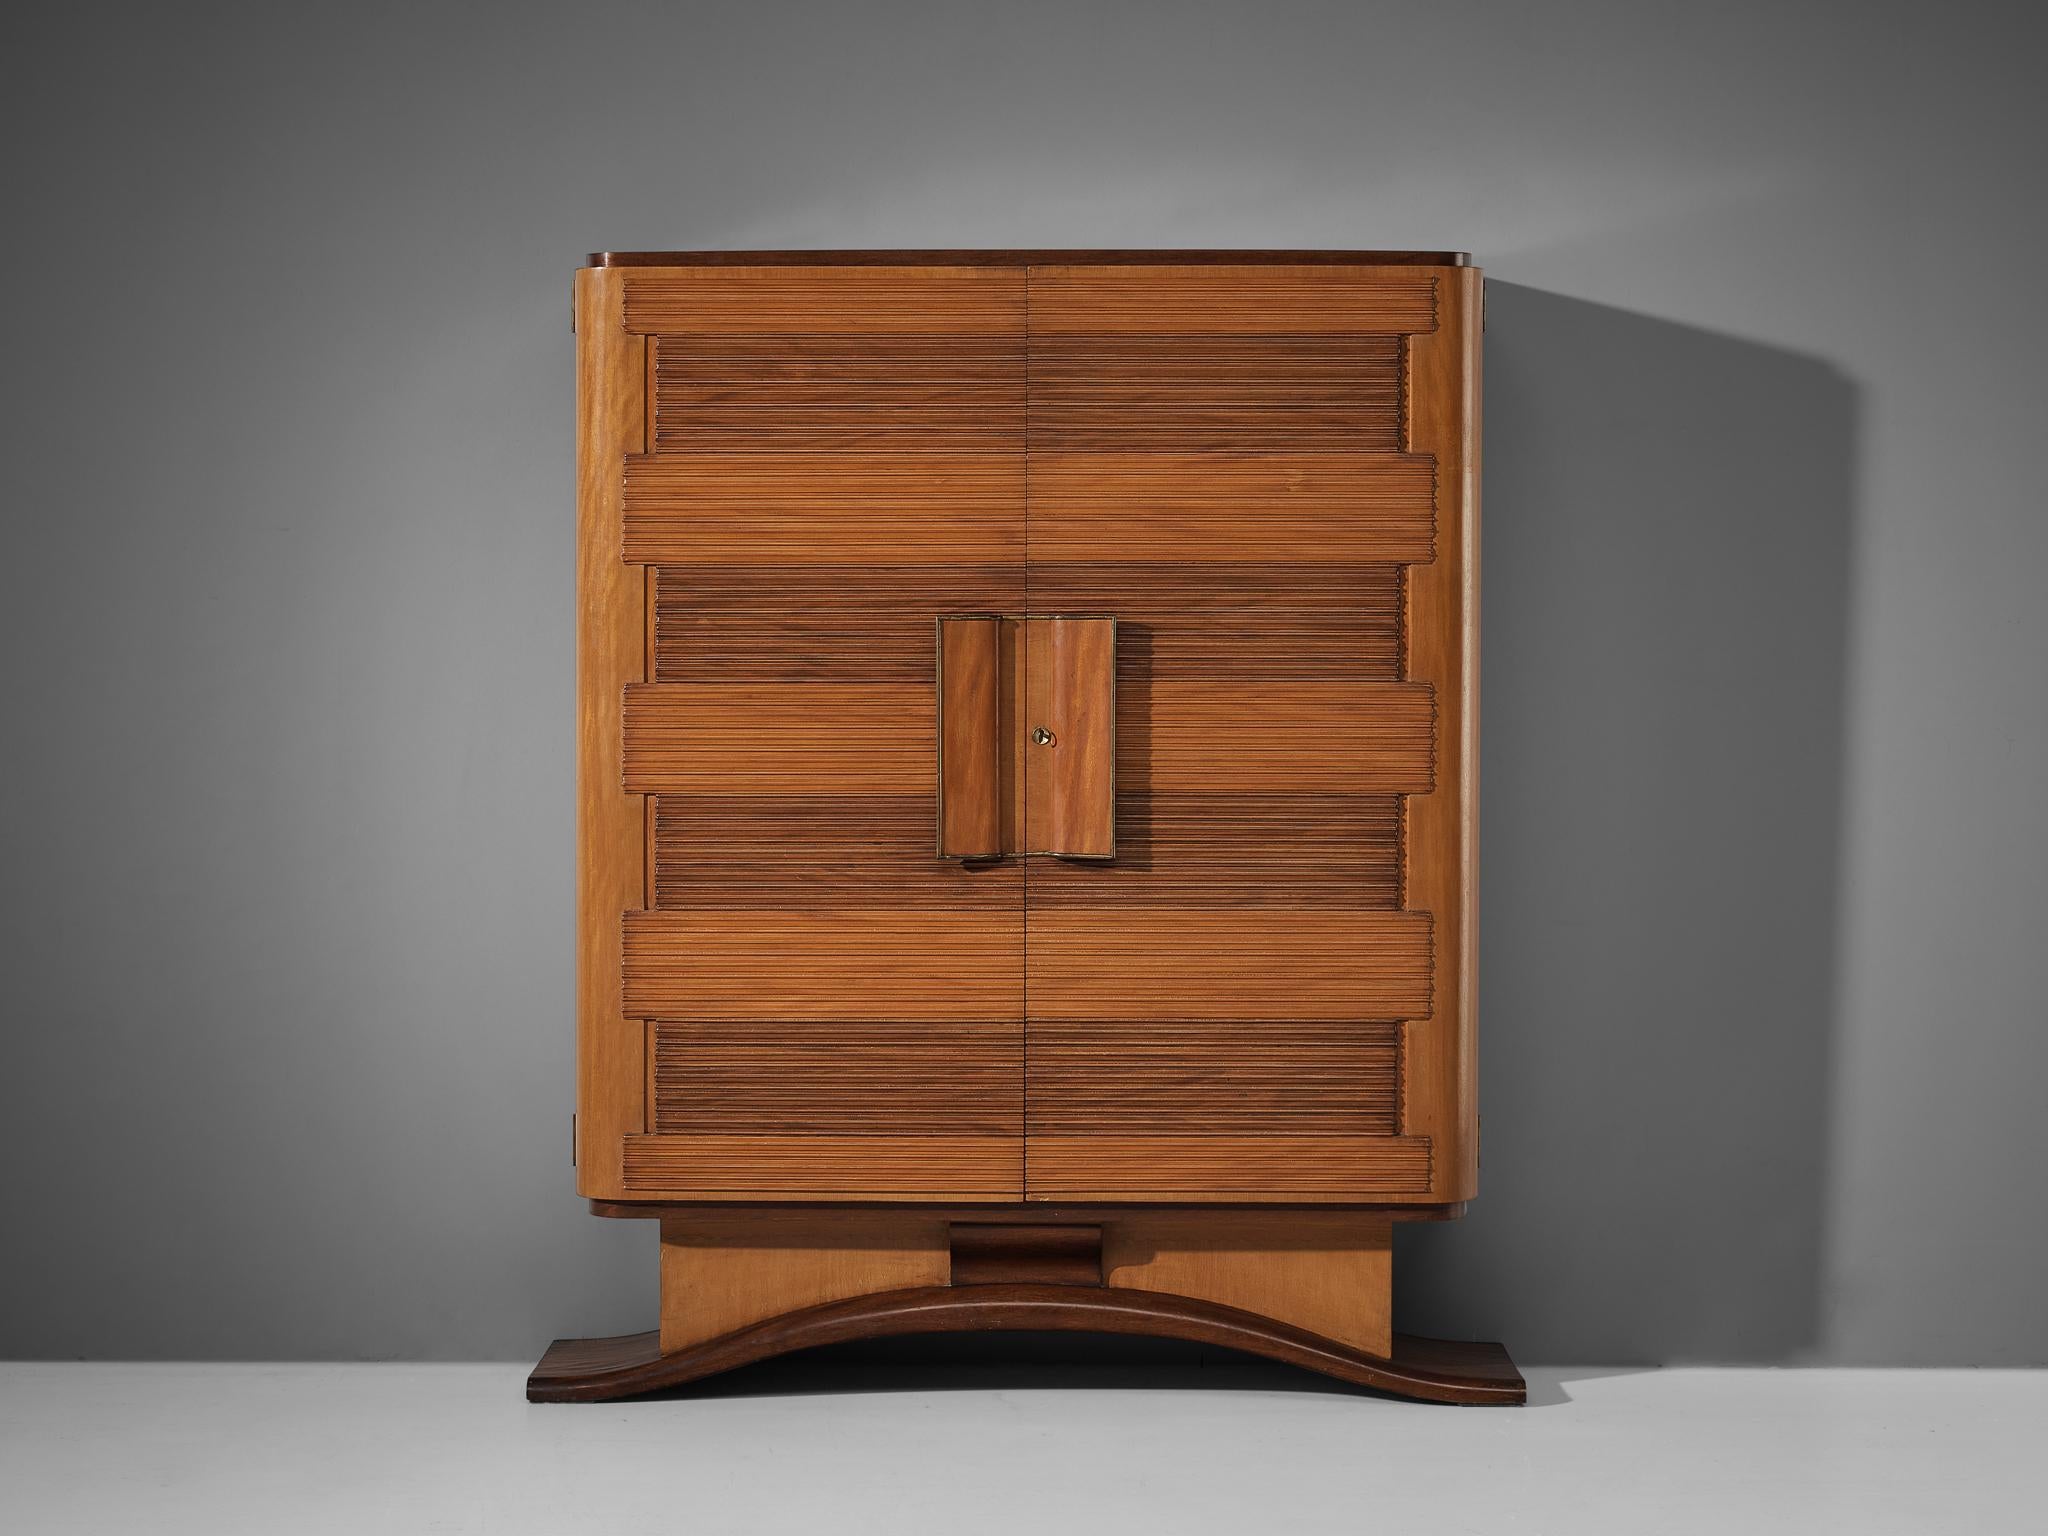 Armoire, brass, glass, mirror, mahogany, cherry, Italy, 1950s 

This charming armoire convinces visually through its graphical door panels composed of carved horizontal lines that specialize the design and highlight the admirable craftsmanship.